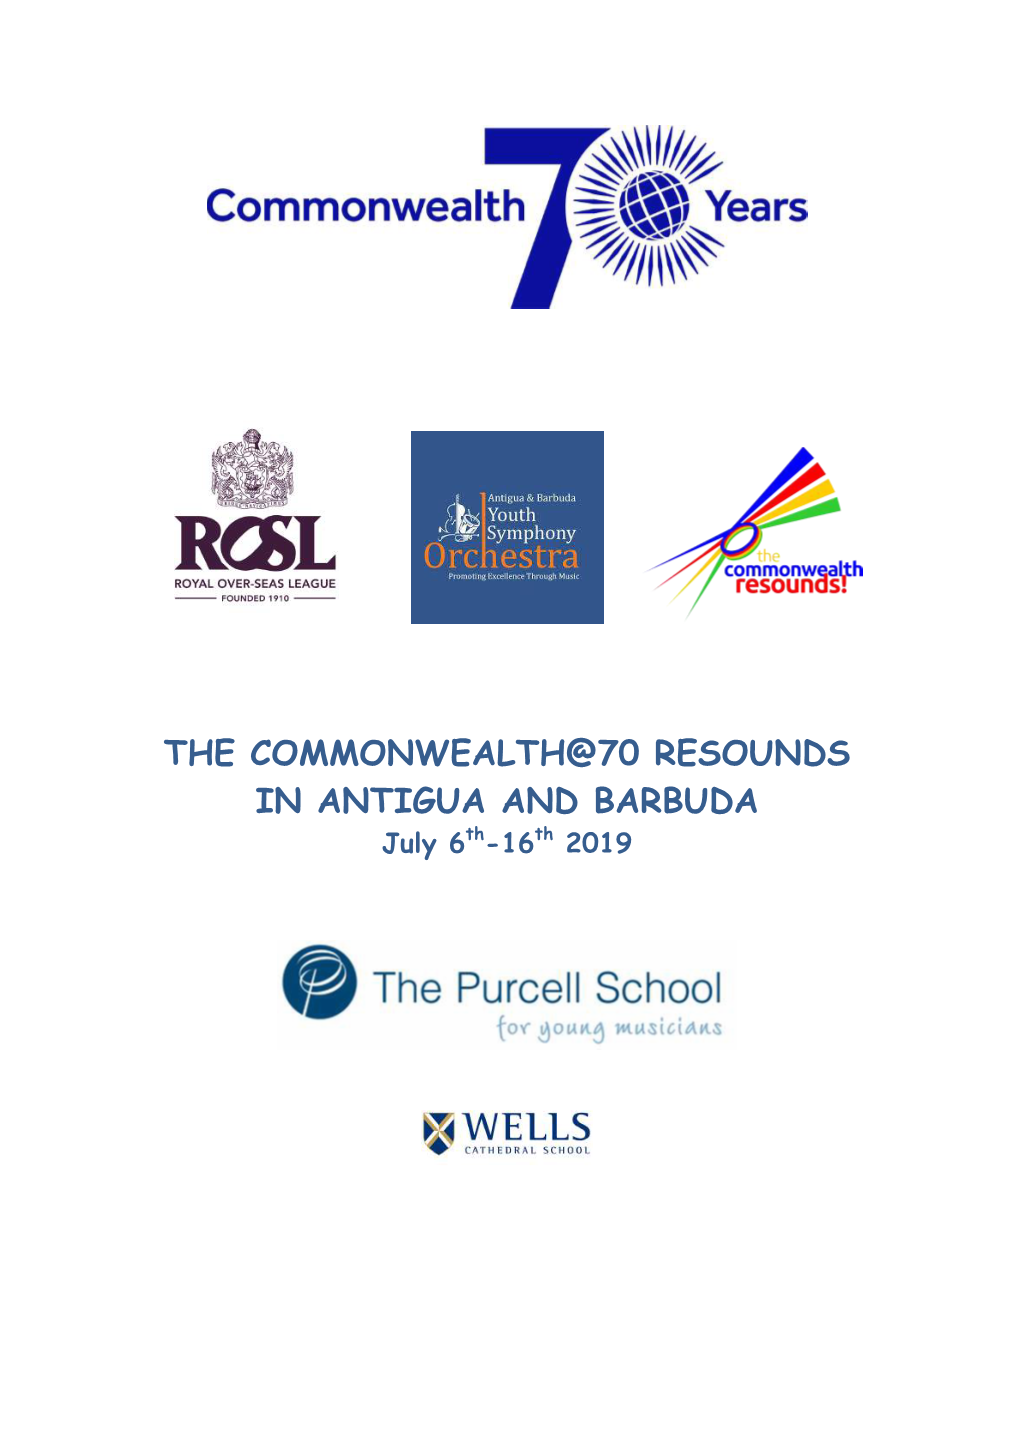 THE COMMONWEALTH@70 RESOUNDS in ANTIGUA and BARBUDA July 6Th-16Th 2019